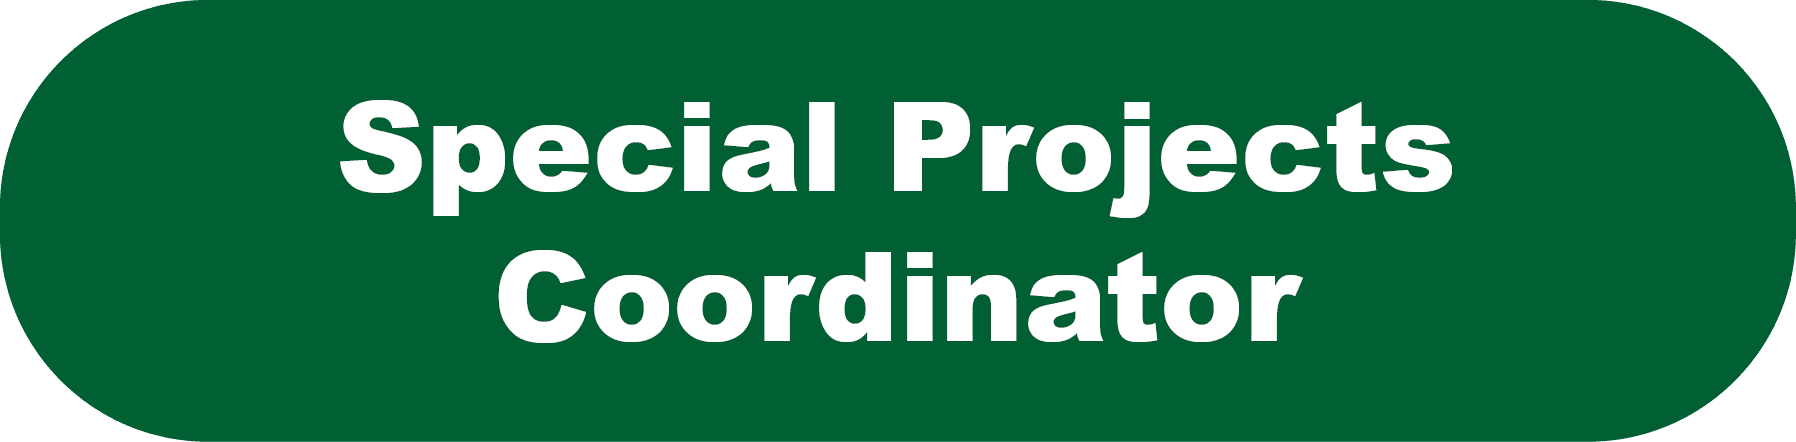 Special Projects Coordinator